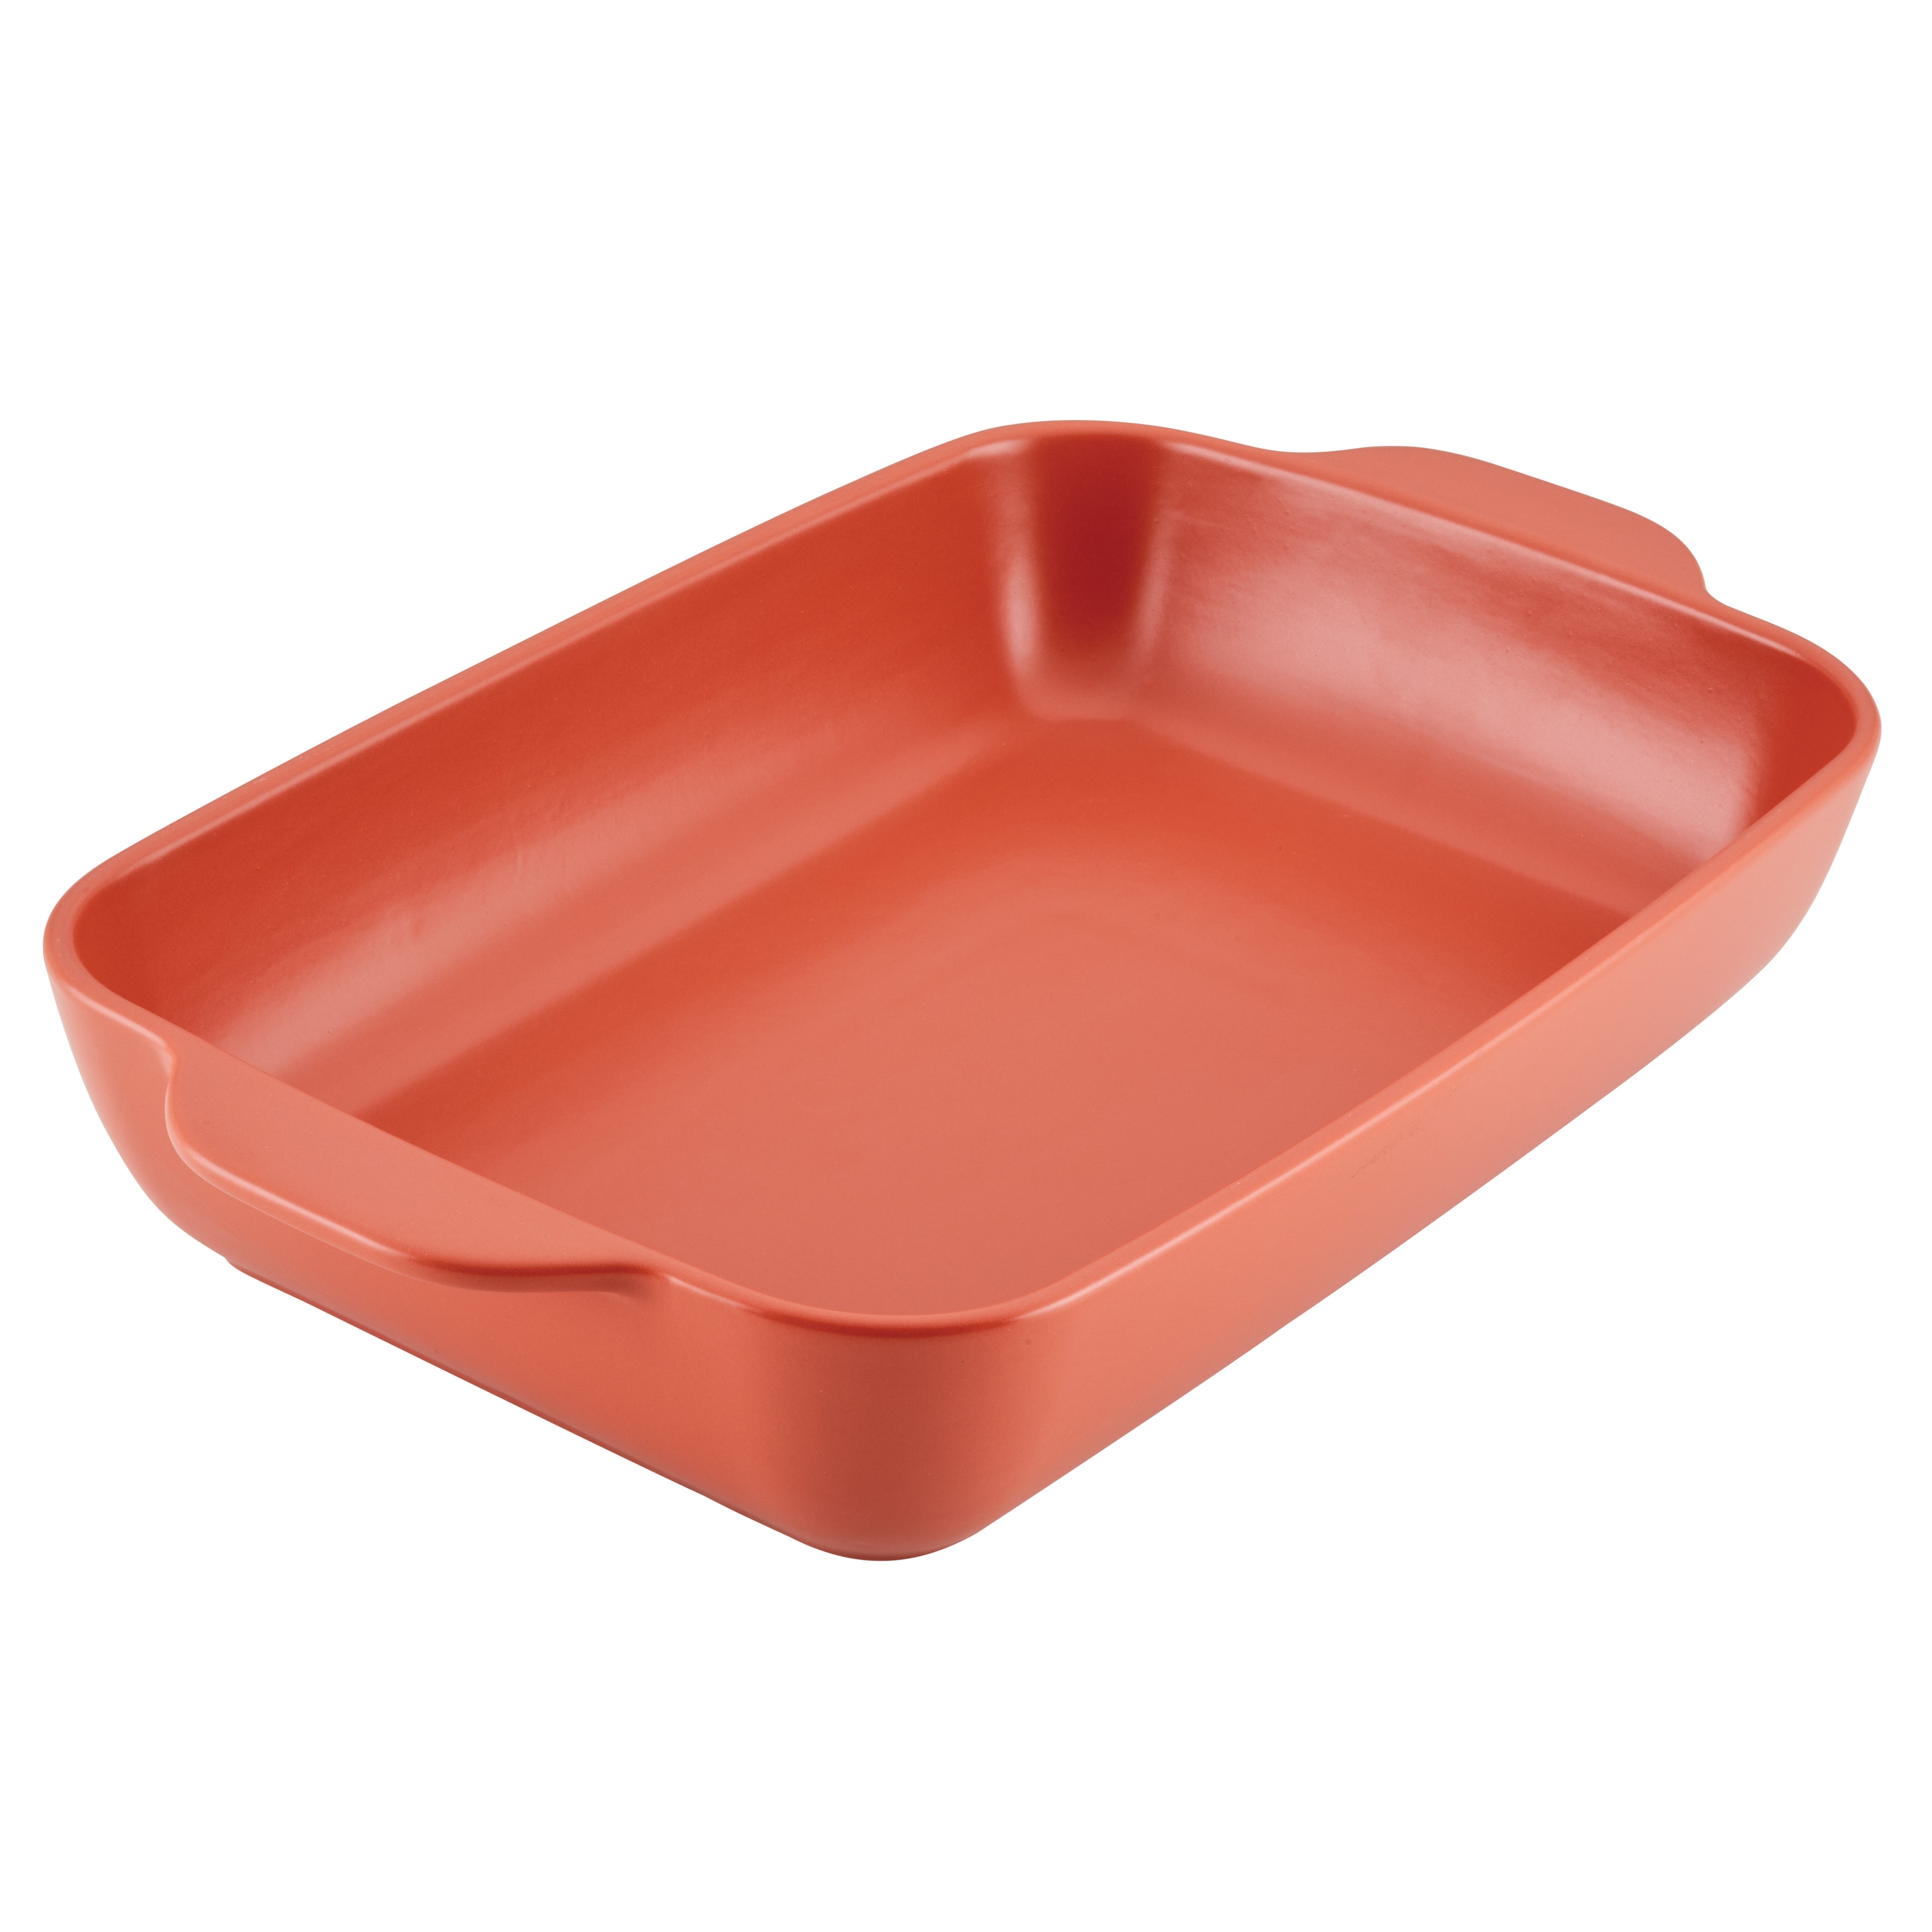 https://ak1.ostkcdn.com/images/products/is/images/direct/b1d211fb0d2883bc4e14c5894701eea7aad2c752/Ayesha-Curry-Rectangular-Ceramic-Baking-Dish%2C-9-Inch-x-13-Inch%2C-Redwood-Red.jpg